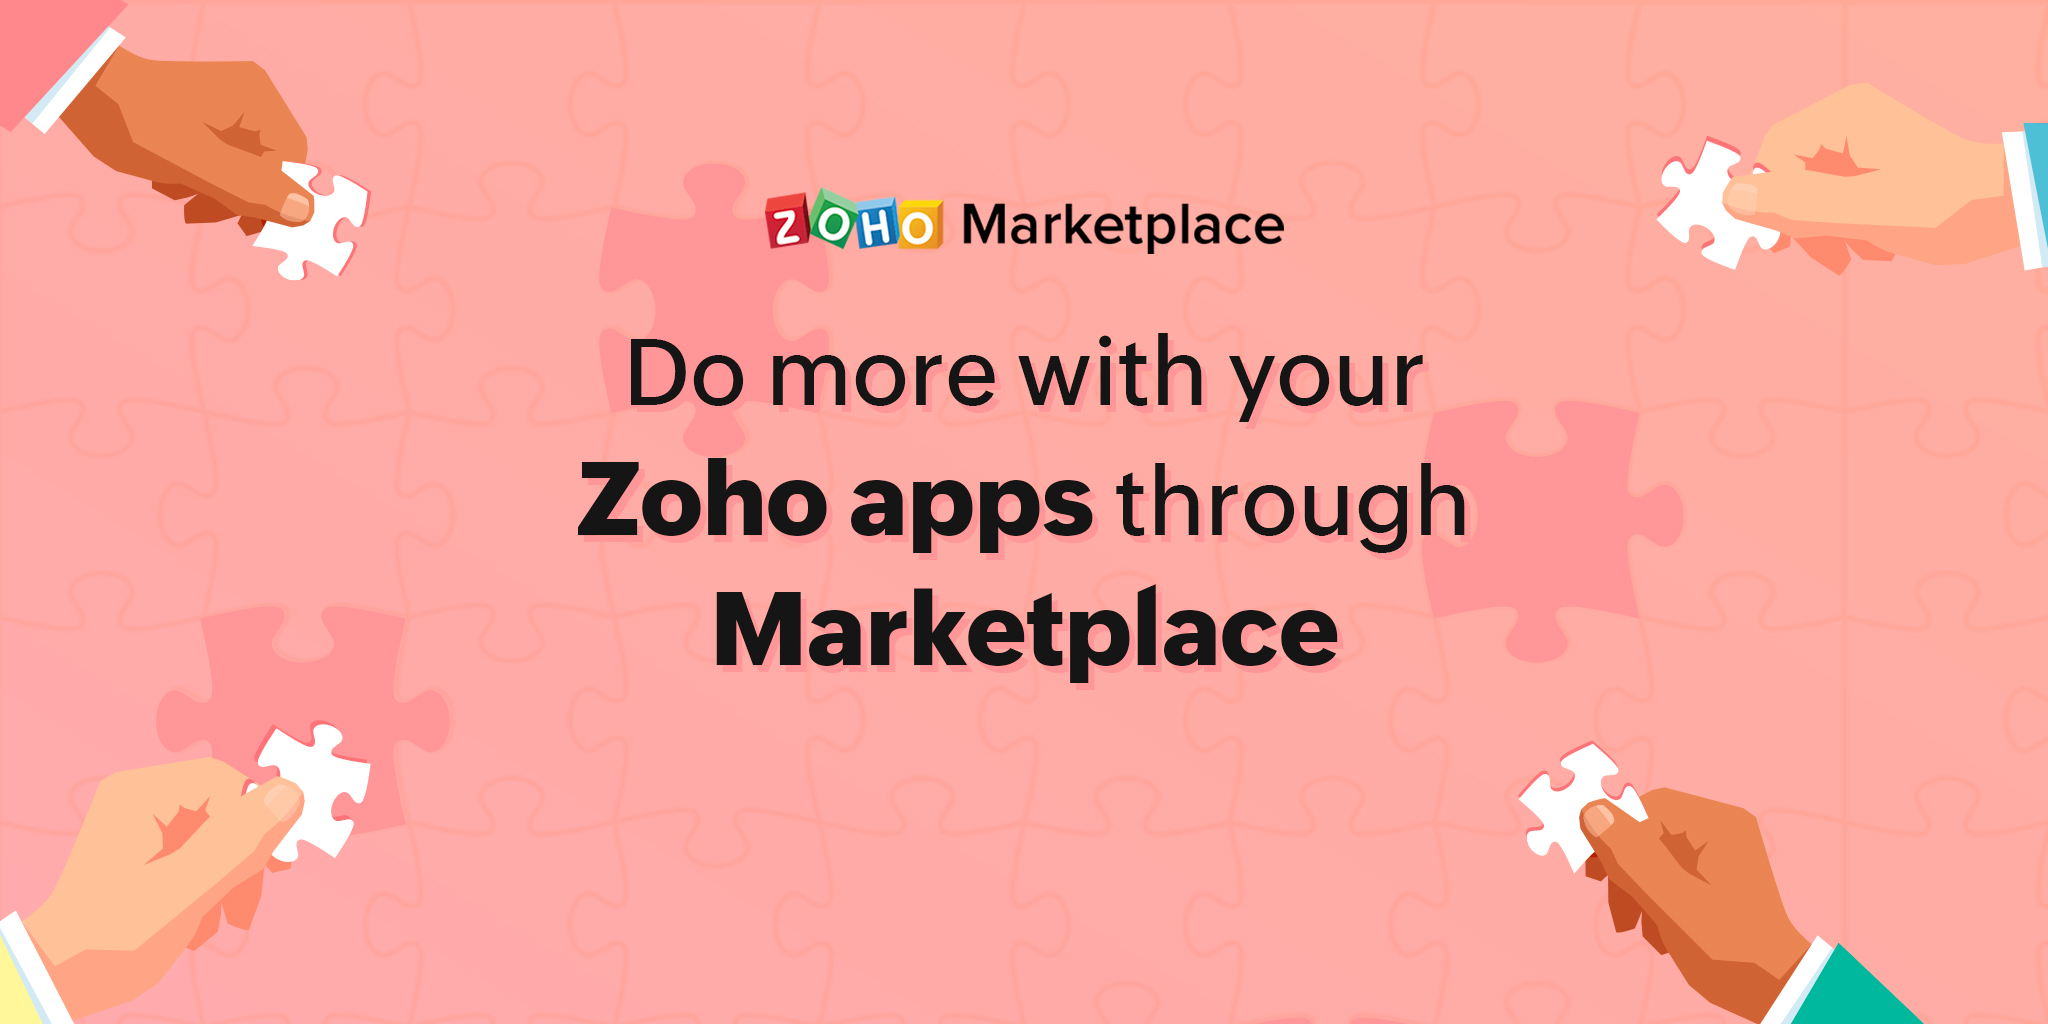 Do more with your Zoho apps through Marketplace